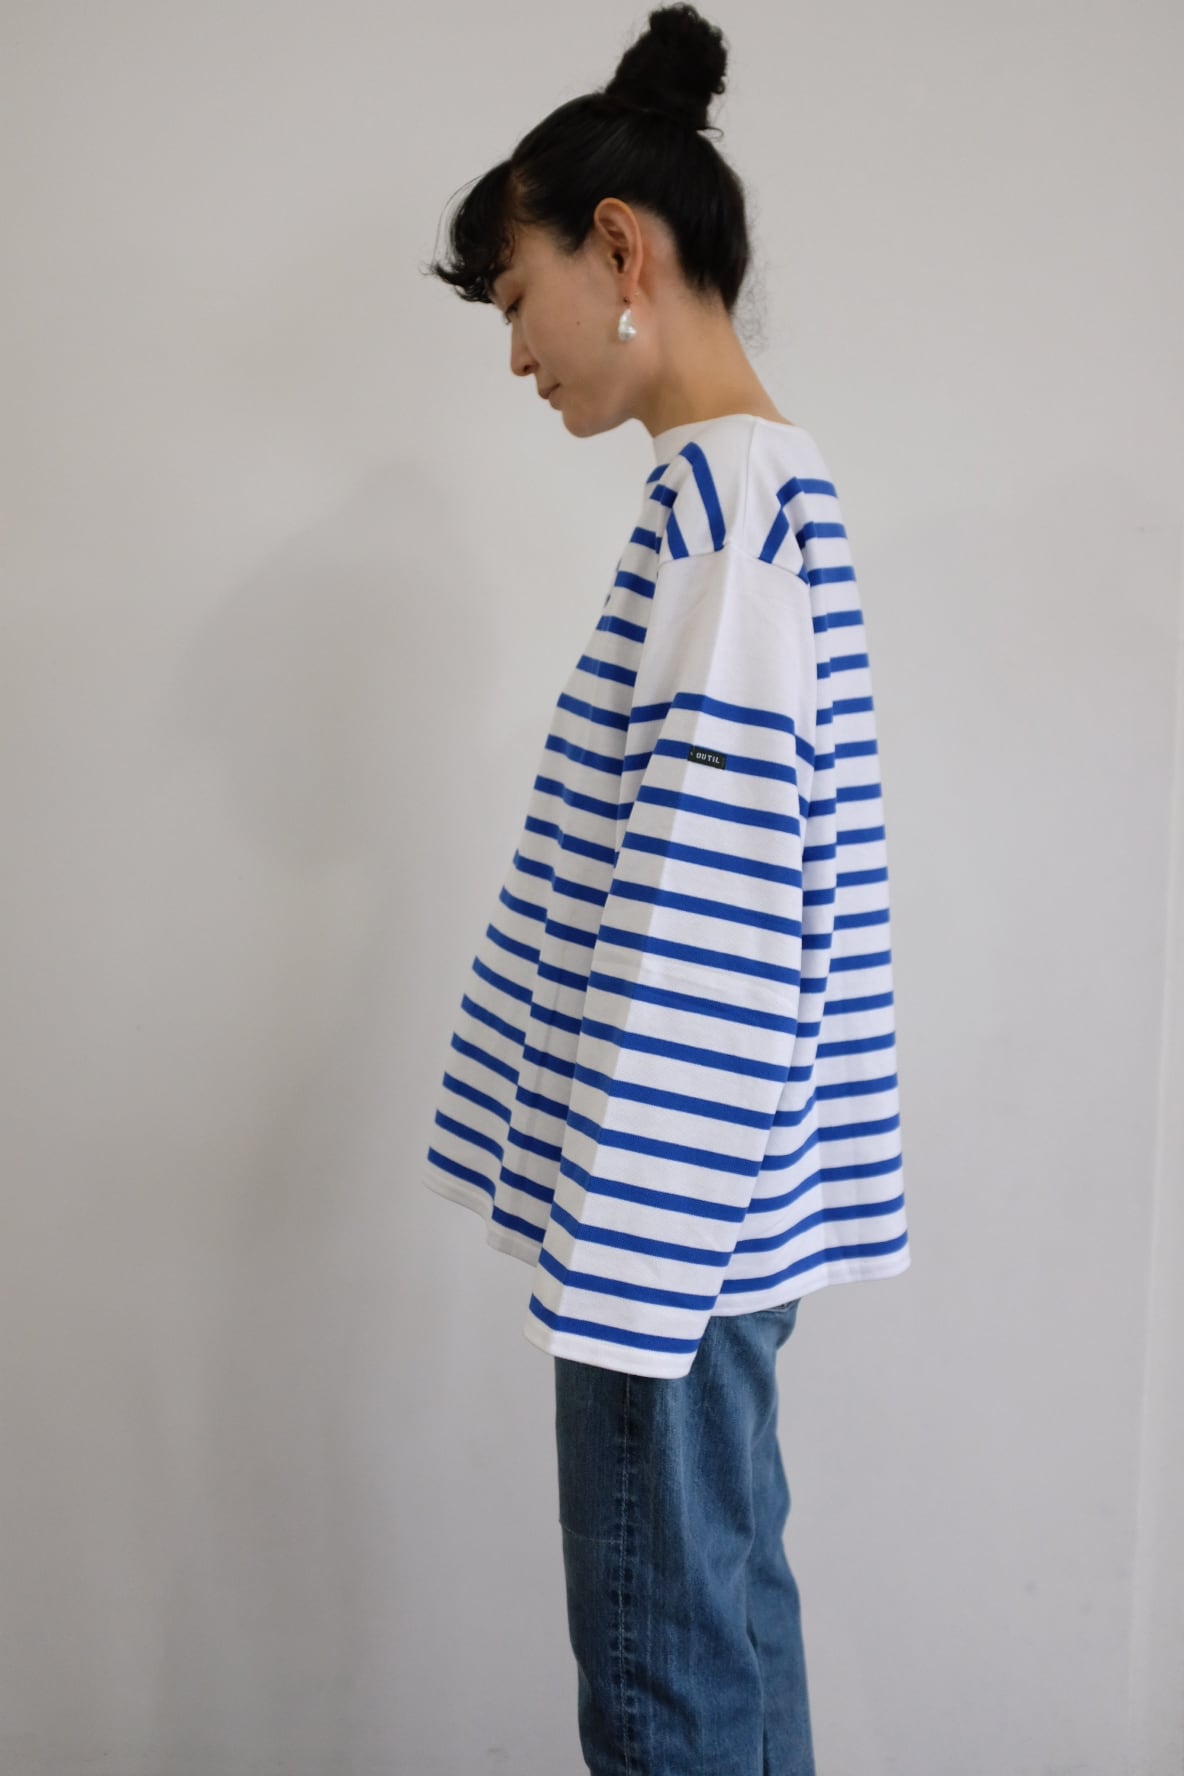 [OUTIL]TRICOT AAST ラッセル網み WHITE/BLUE | YES-姫路の美容院と服のお店YES(イエス)です。 powered  by BASE